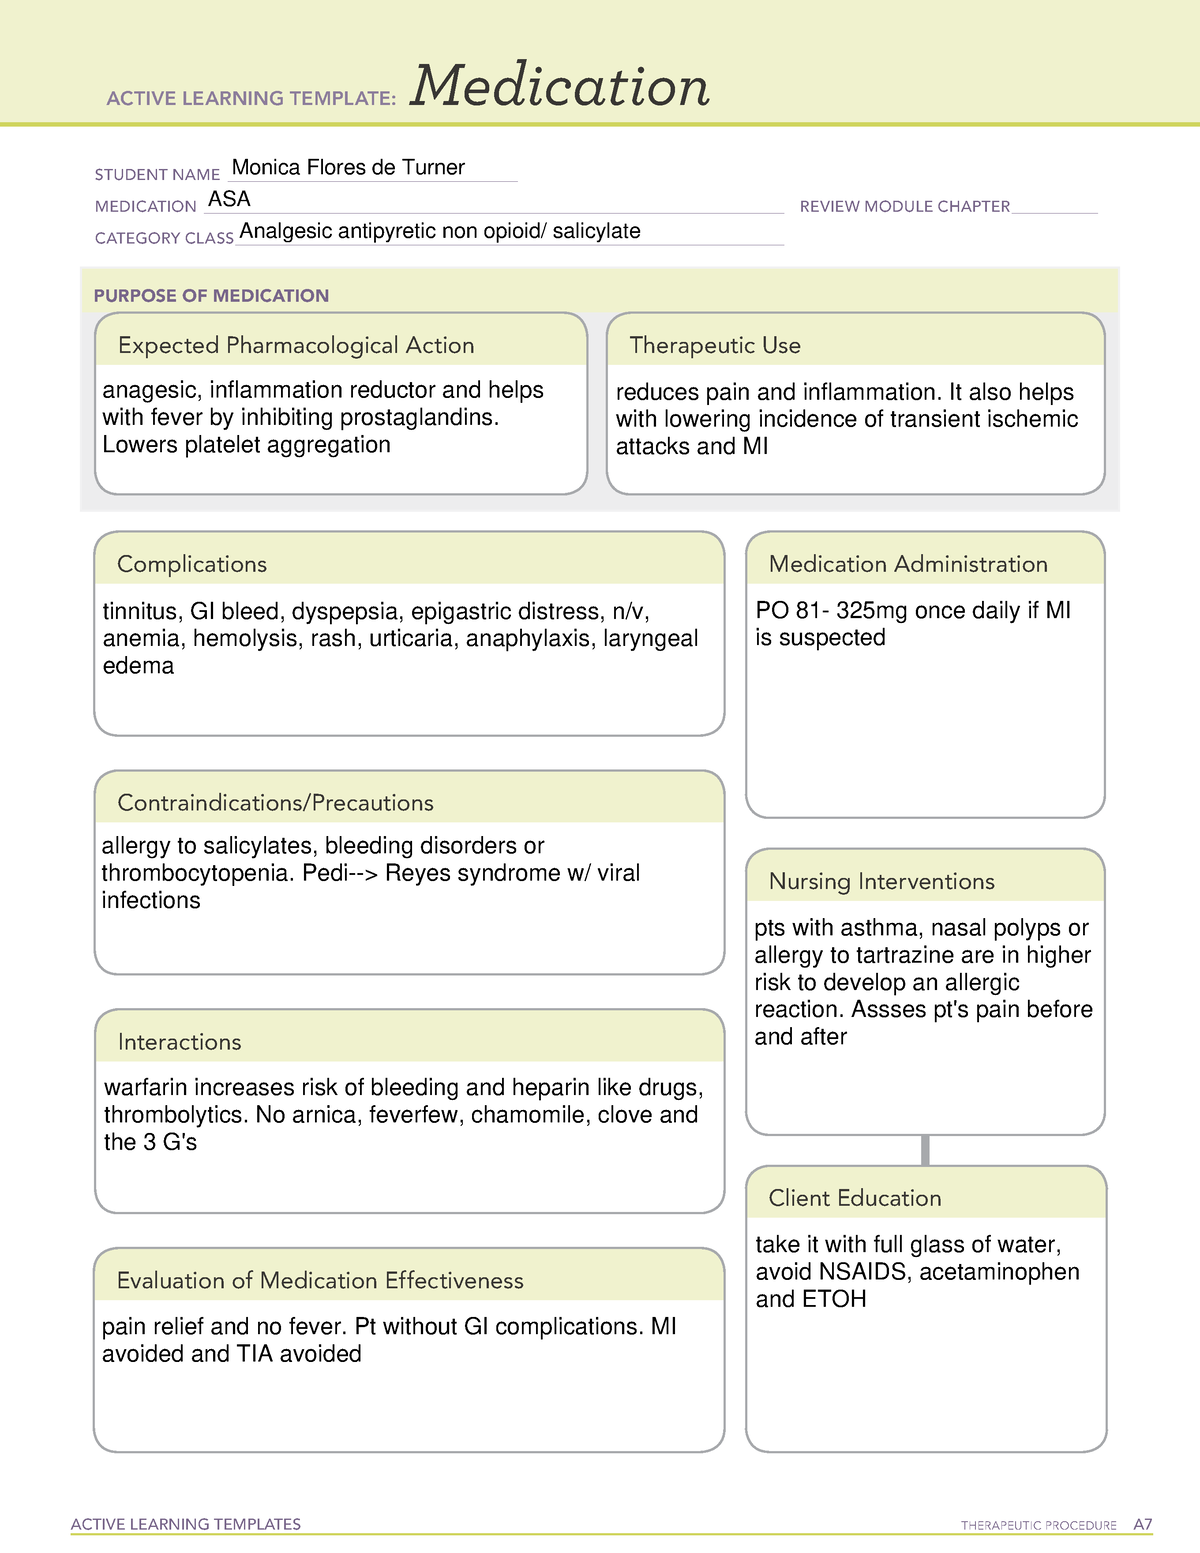 Aspirin medication template for ATI ACTIVE LEARNING TEMPLATES